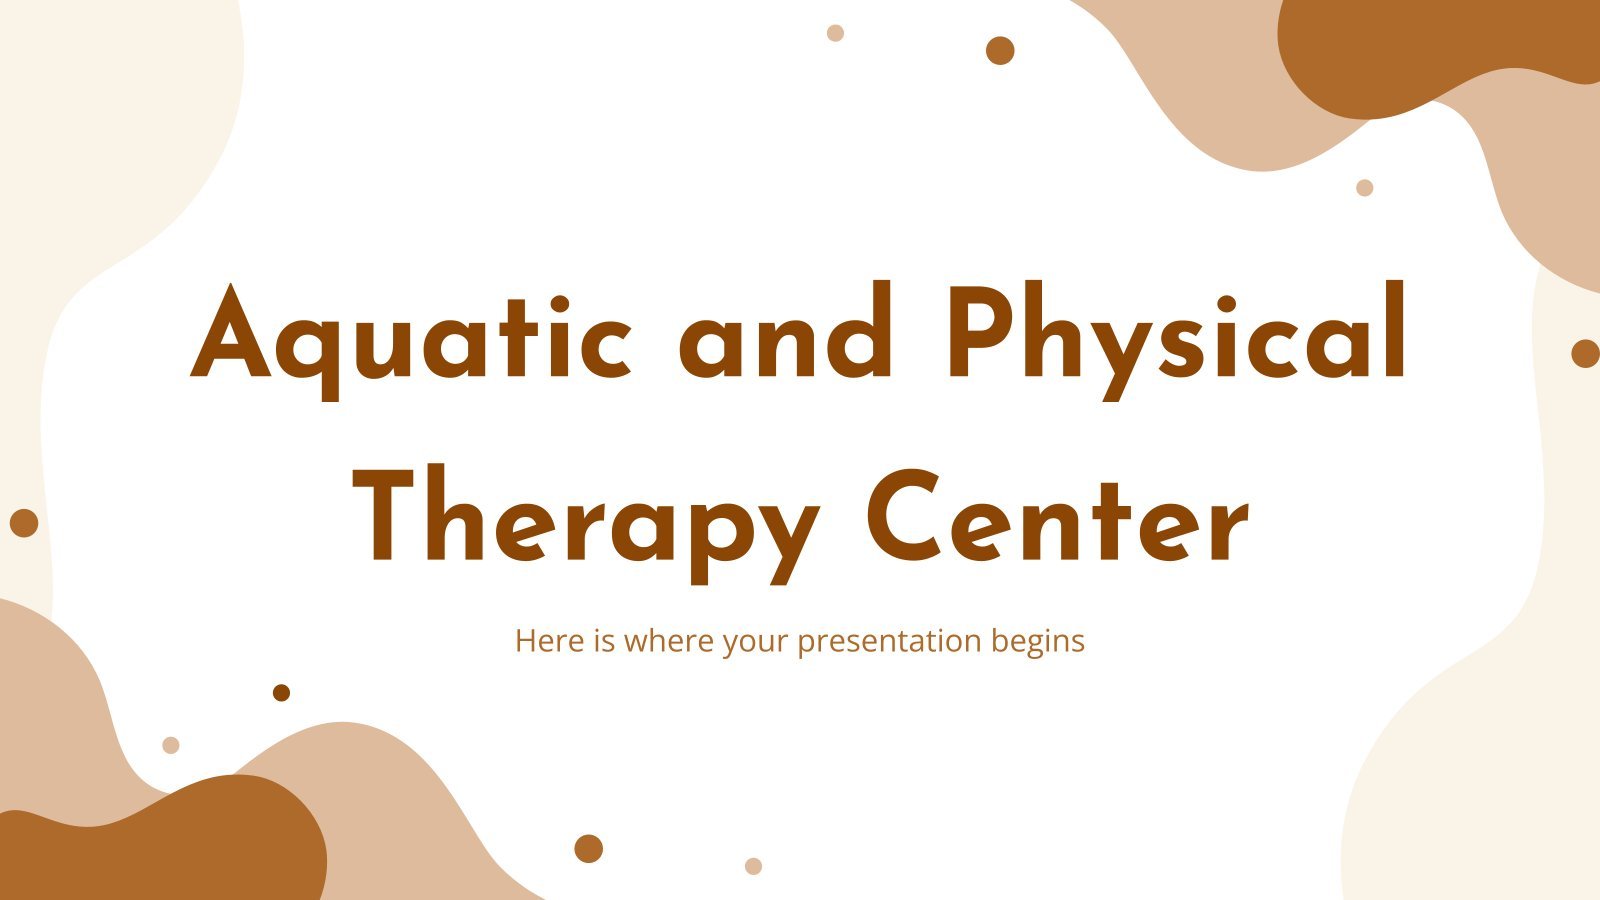 Aquatic and Physical Therapy Center presentation template 